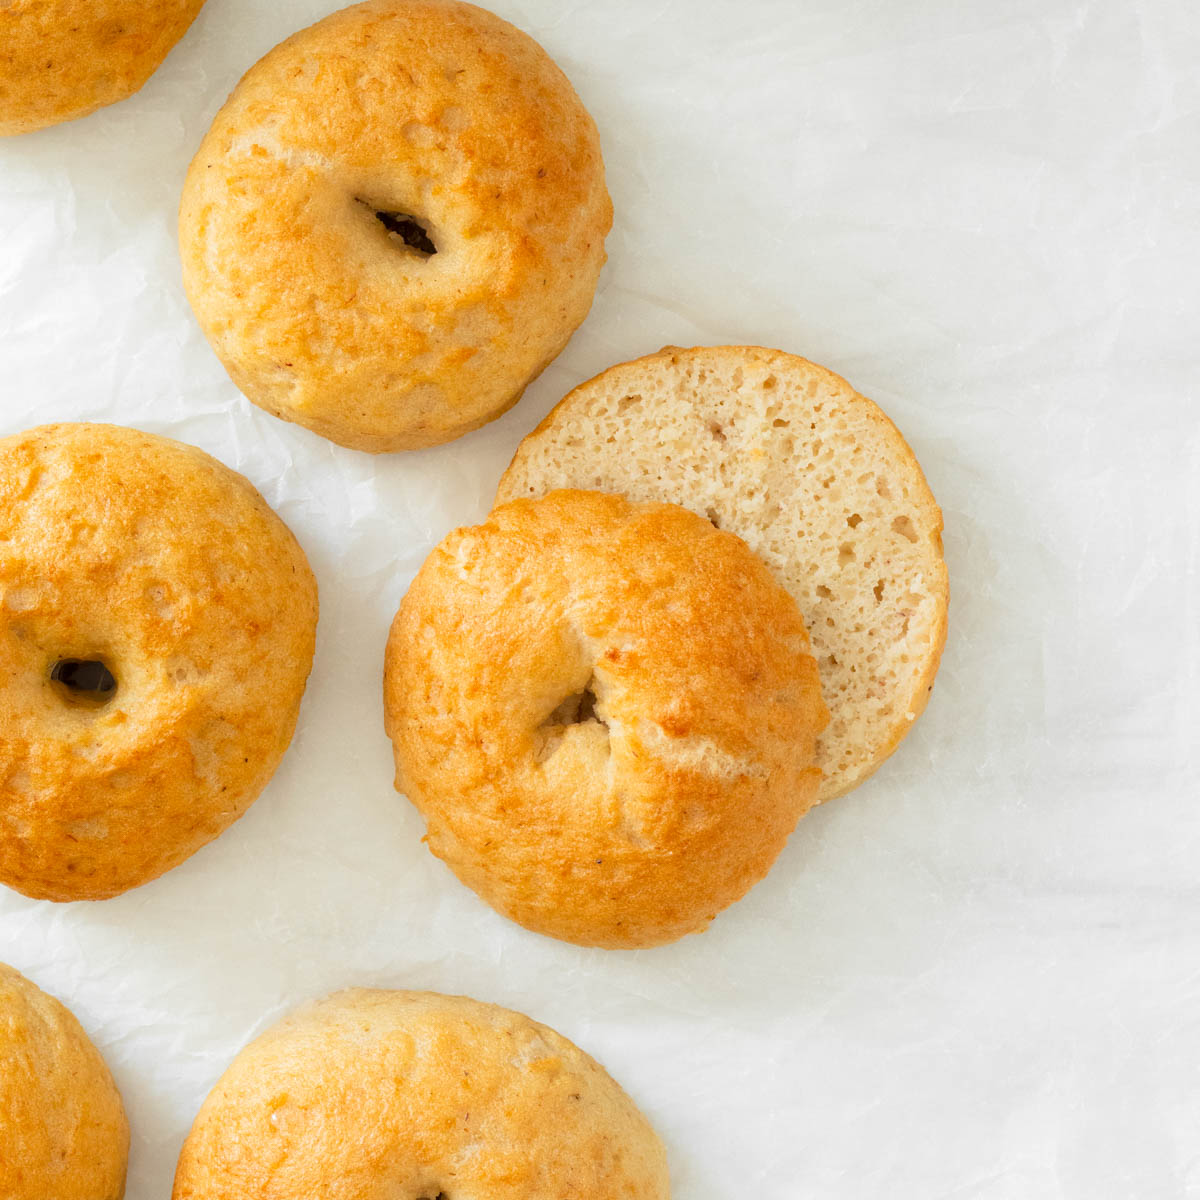 These gluten-free sourdough bagels are the perfect chewy gluten-free bagels made with a gluten-free sourdough starter. These homemade bagels are an easy breakfast recipe and great for storing in the freezer to enjoy later!